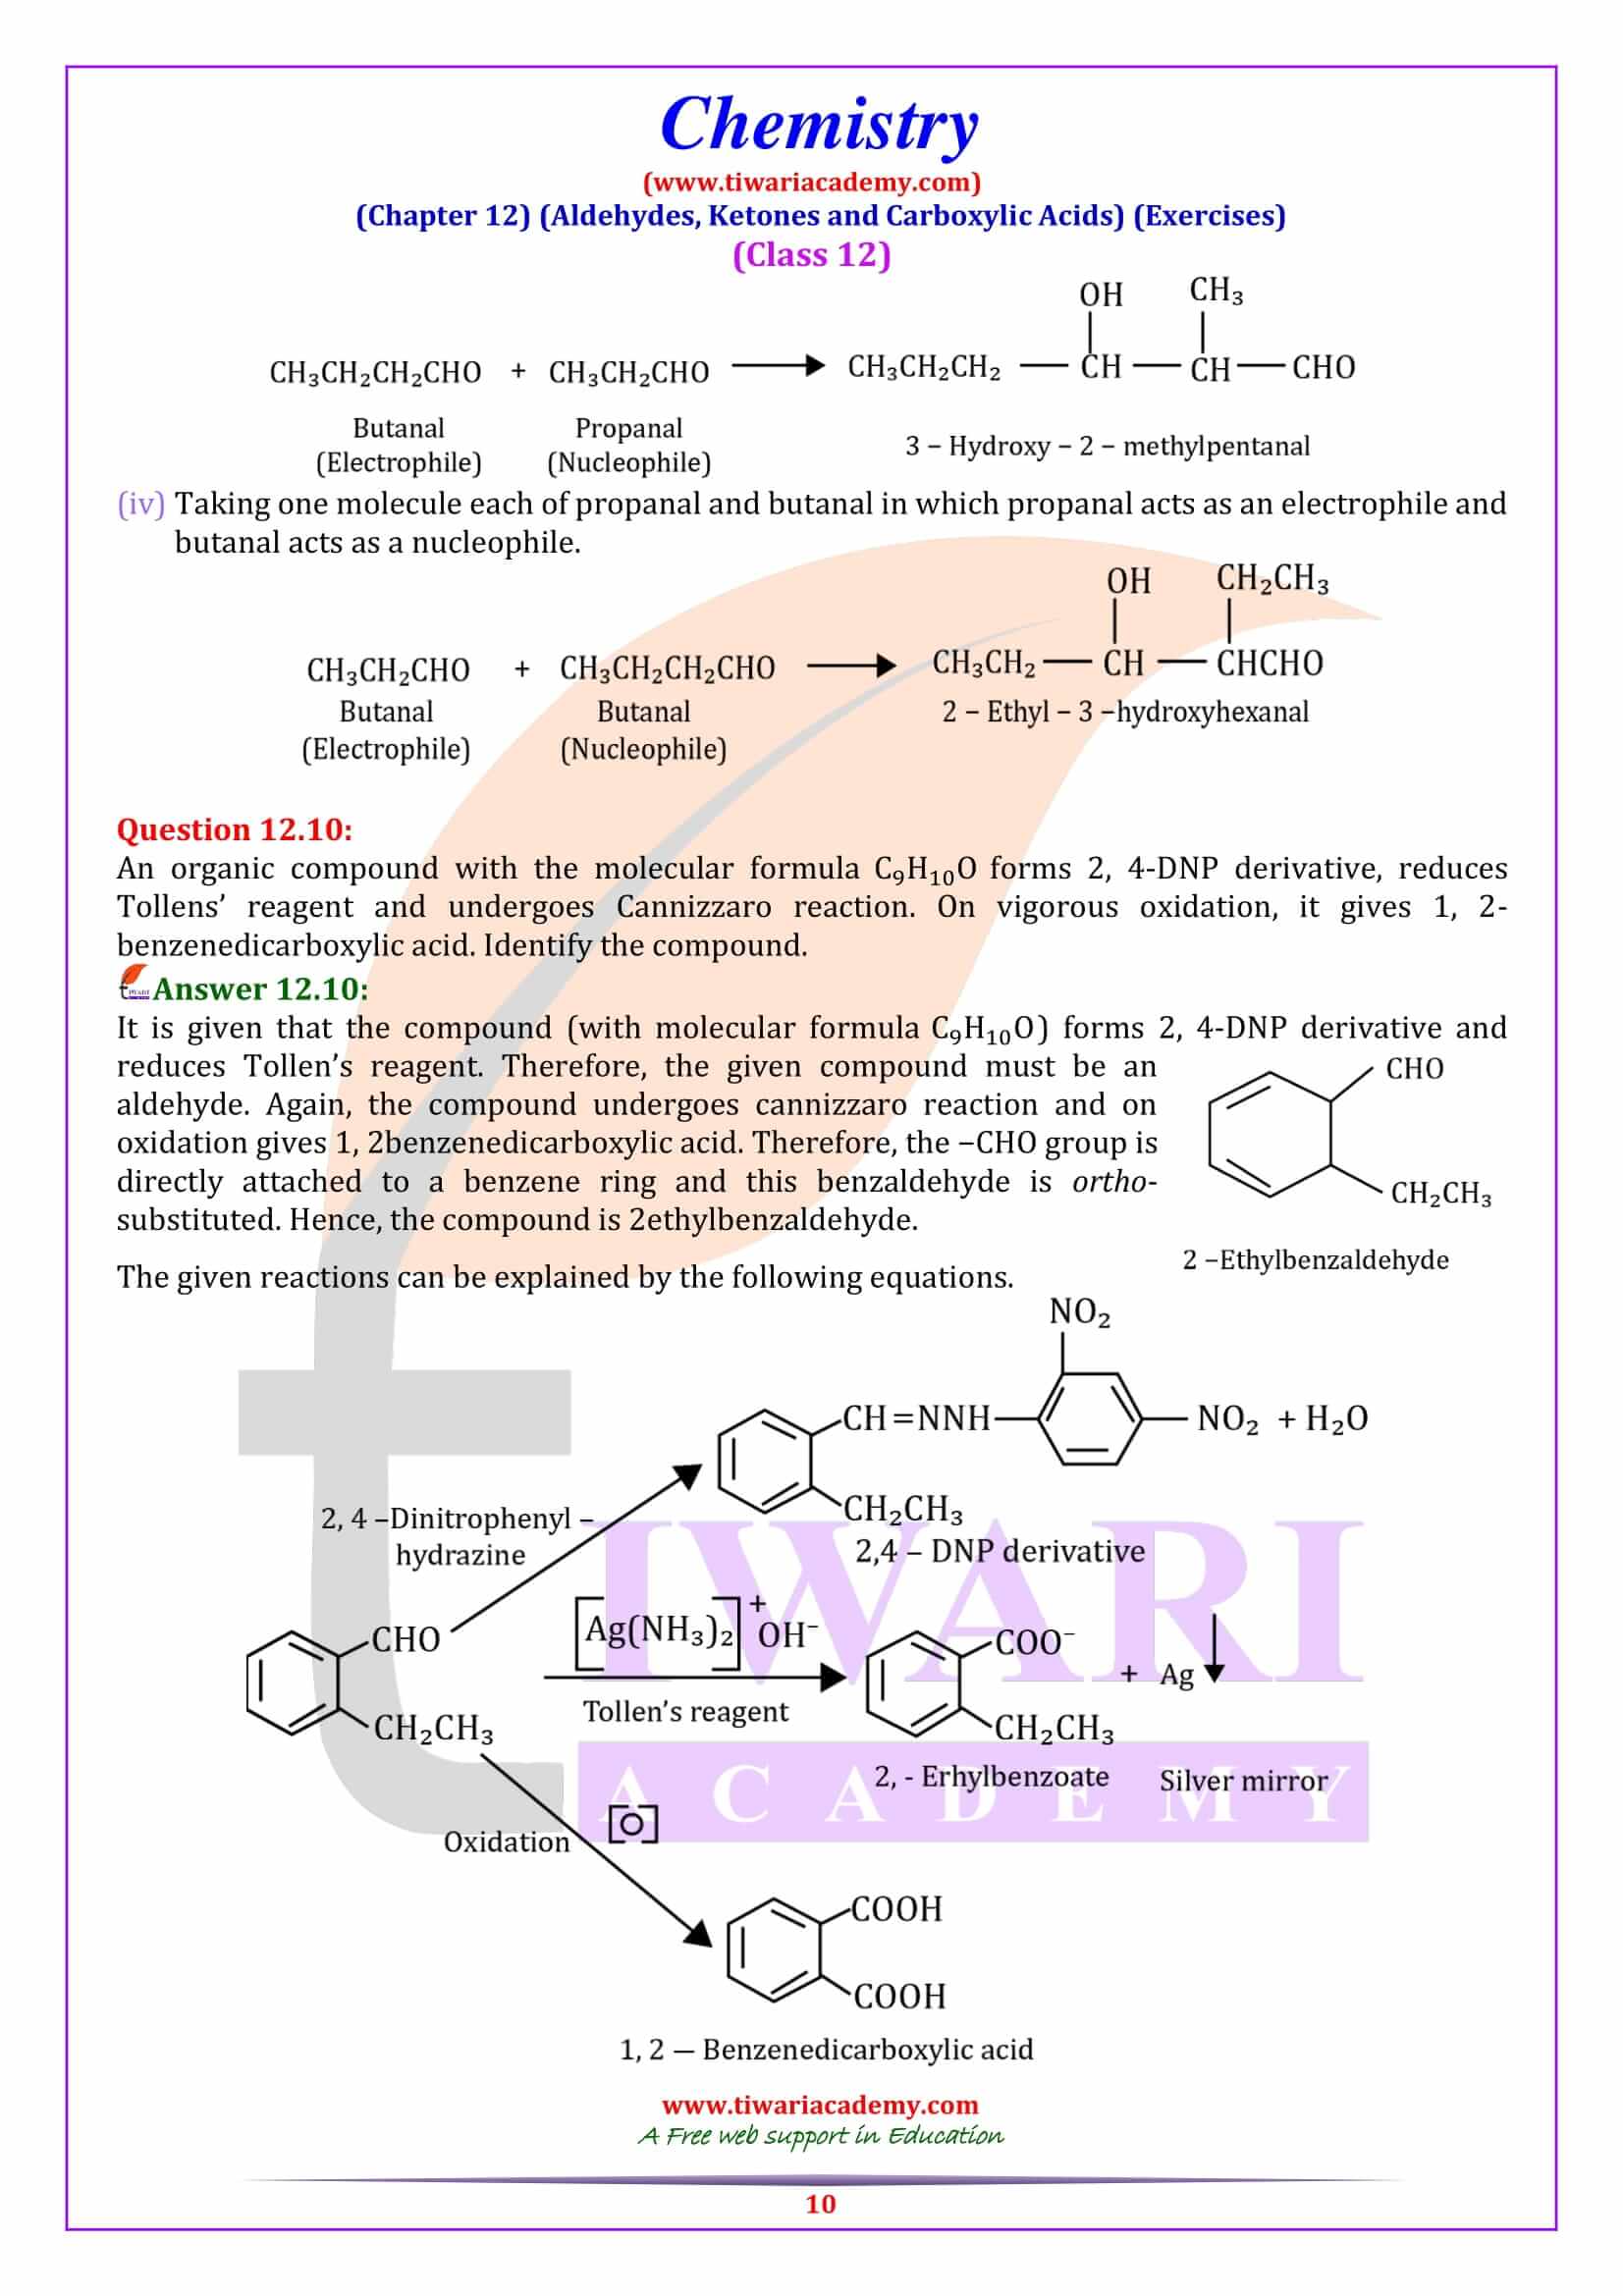 NCERT Solutions for Class 12 Chemistry Chapter 12 Textbook questions